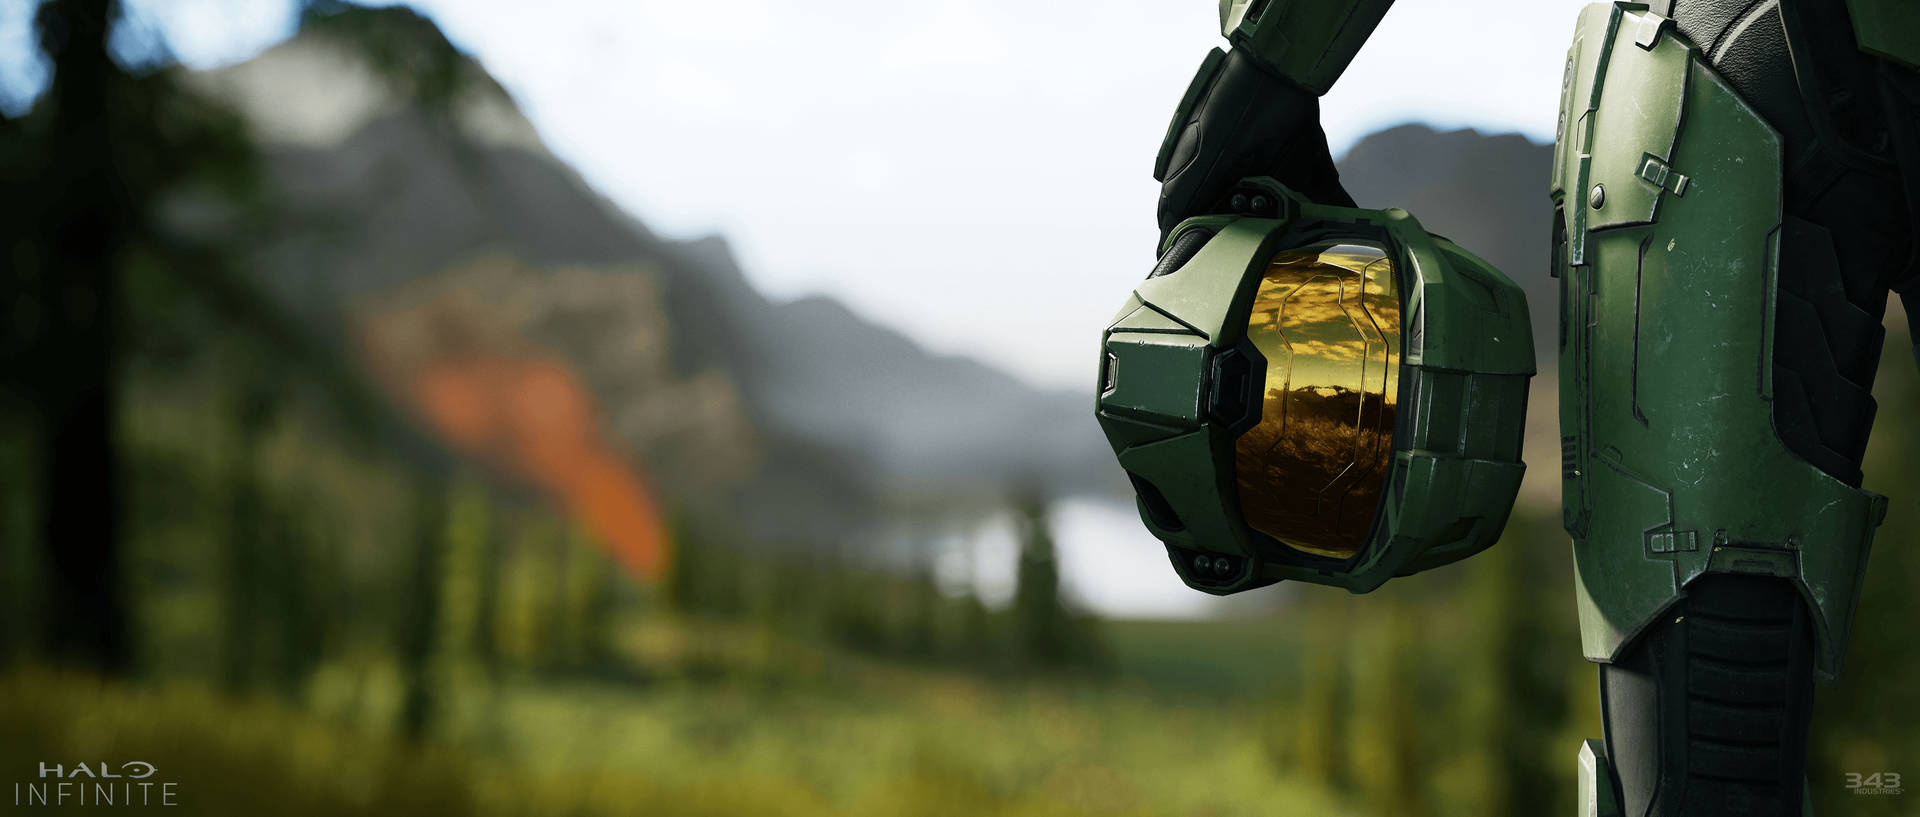 3840X1634 Halo Infinite Wallpaper and Background